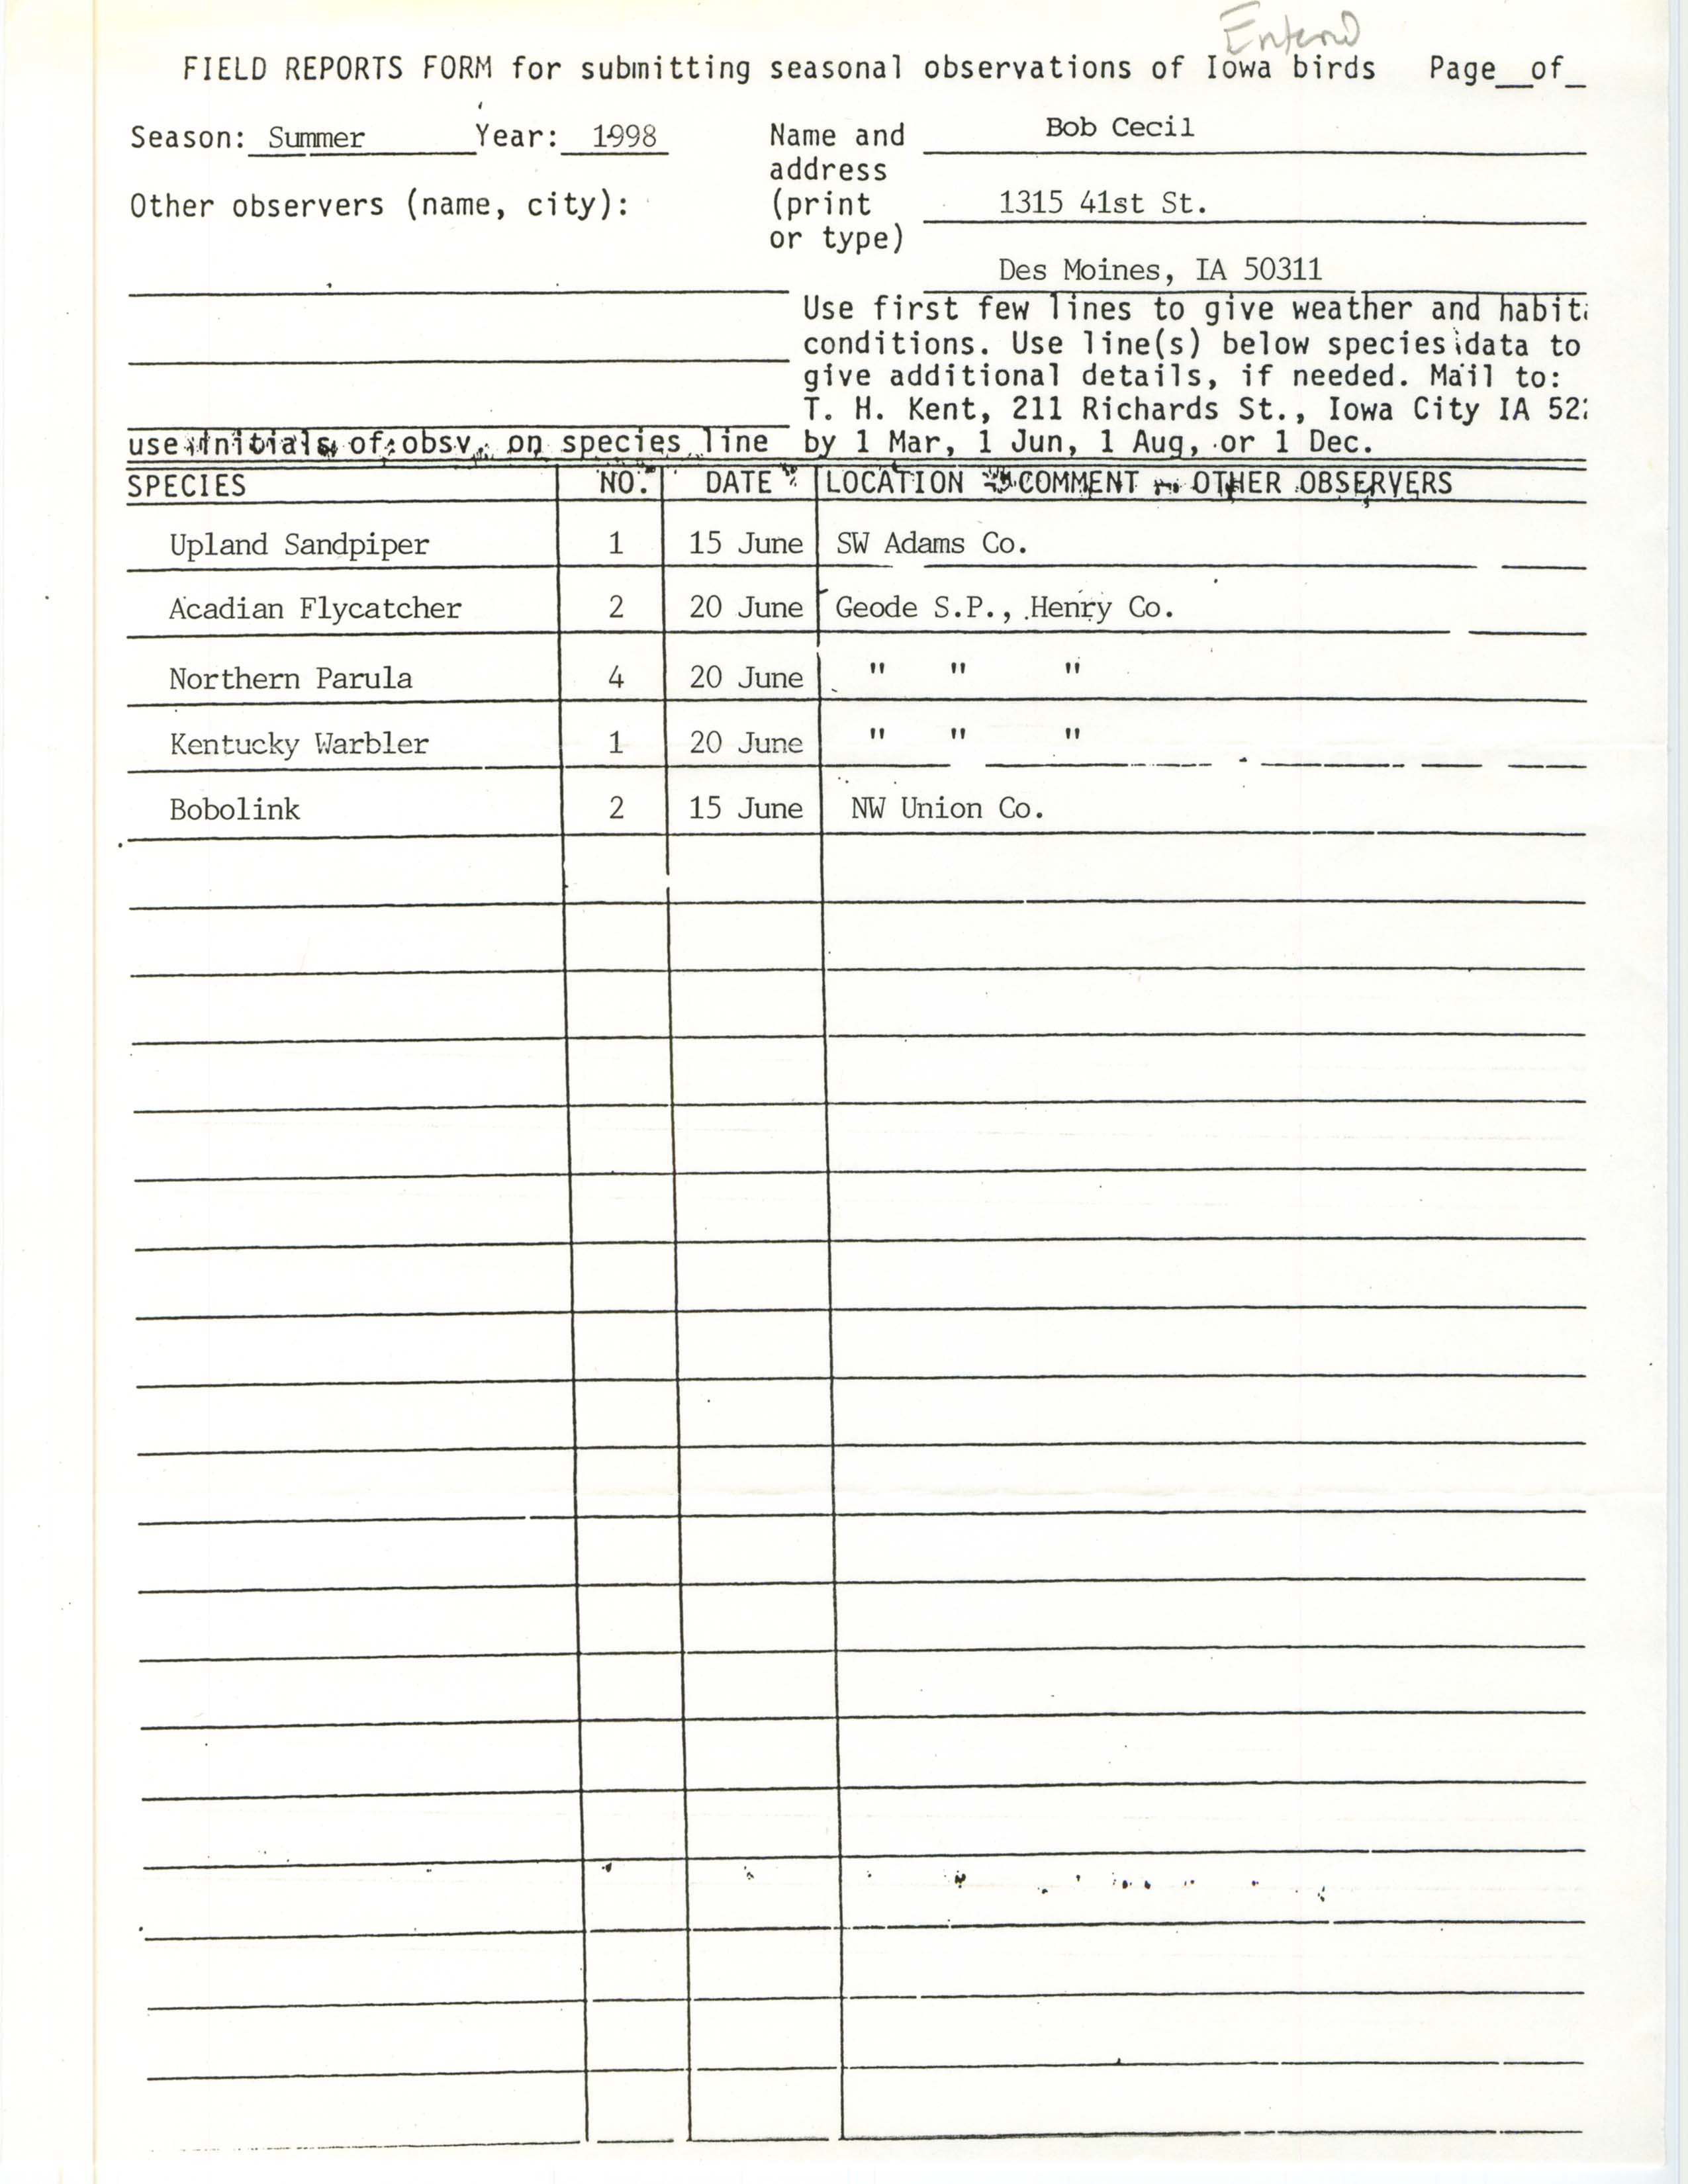 Field reports form for submitting seasonal observations of Iowa birds, Bob Cecil, summer 1998